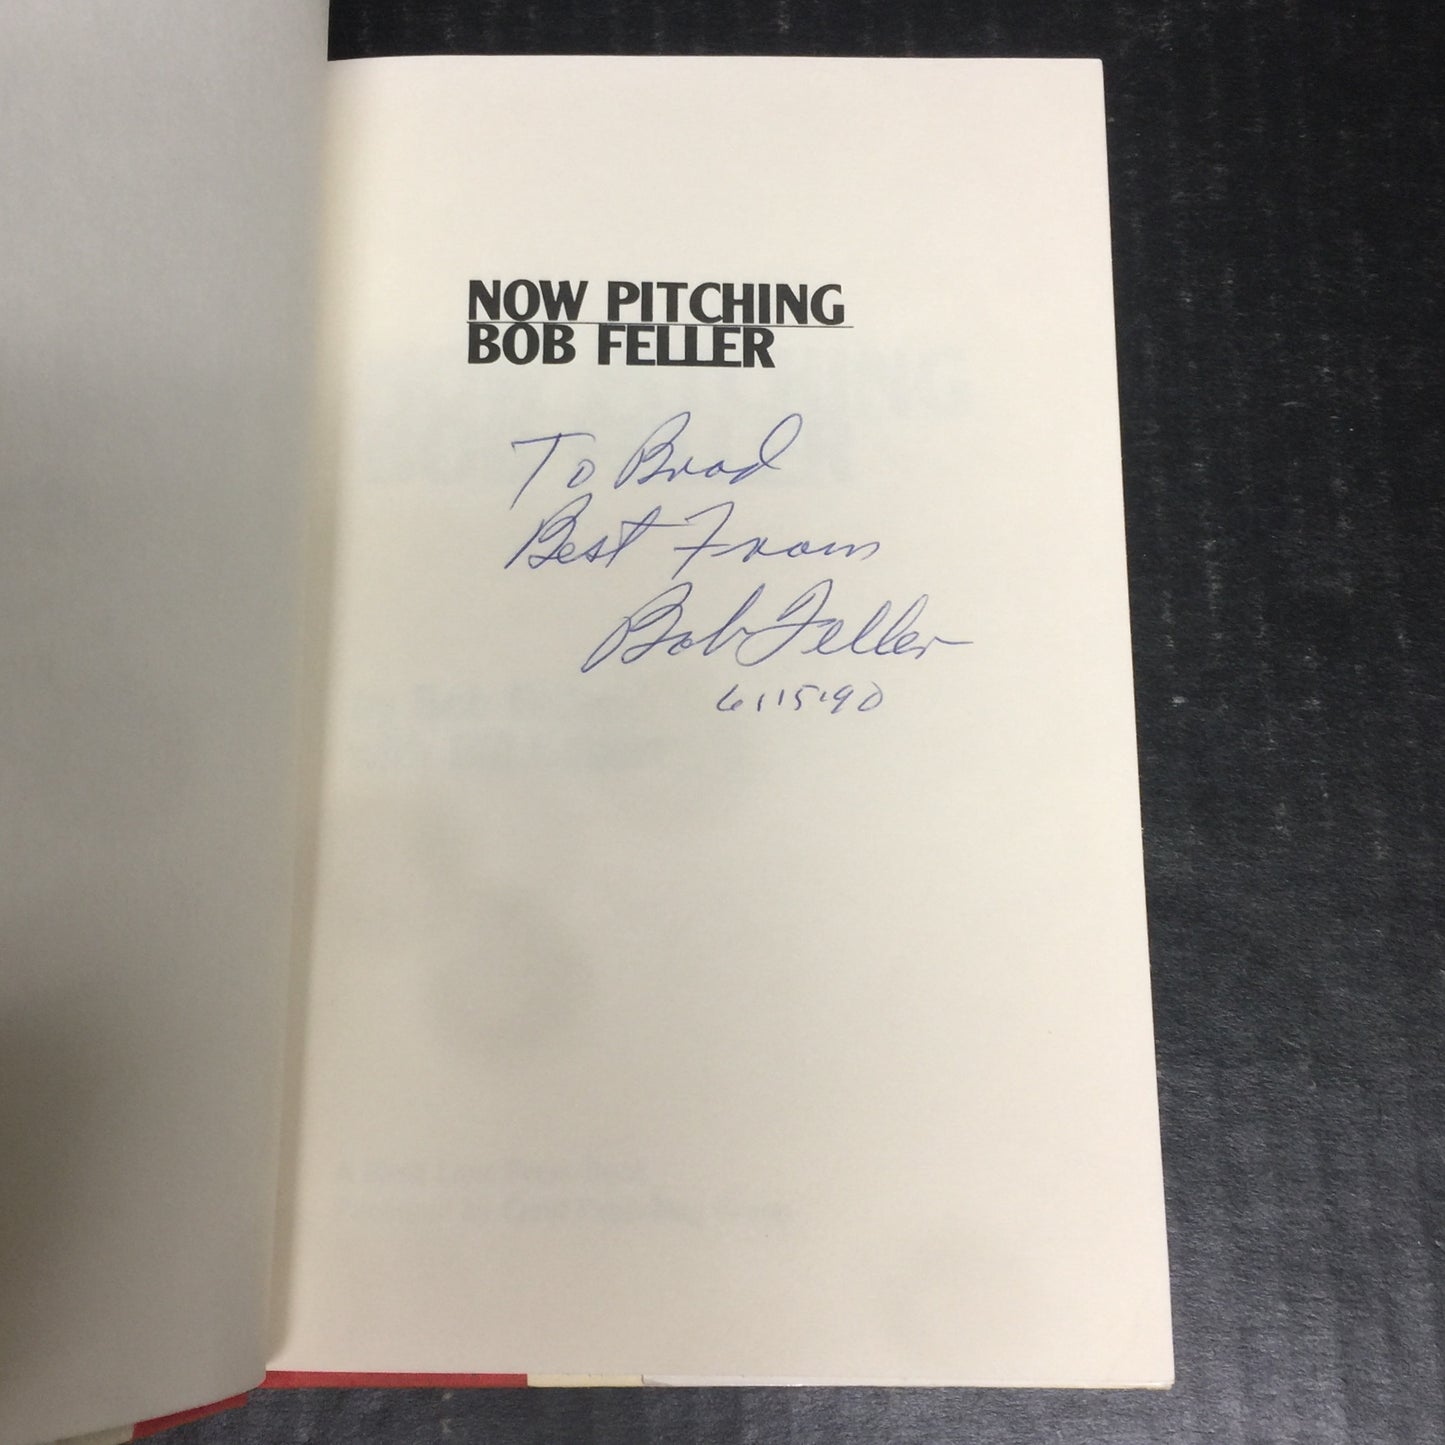 Now Pitching Bob Feller - Bob Feller - Signed by Author - First Edition - 1990